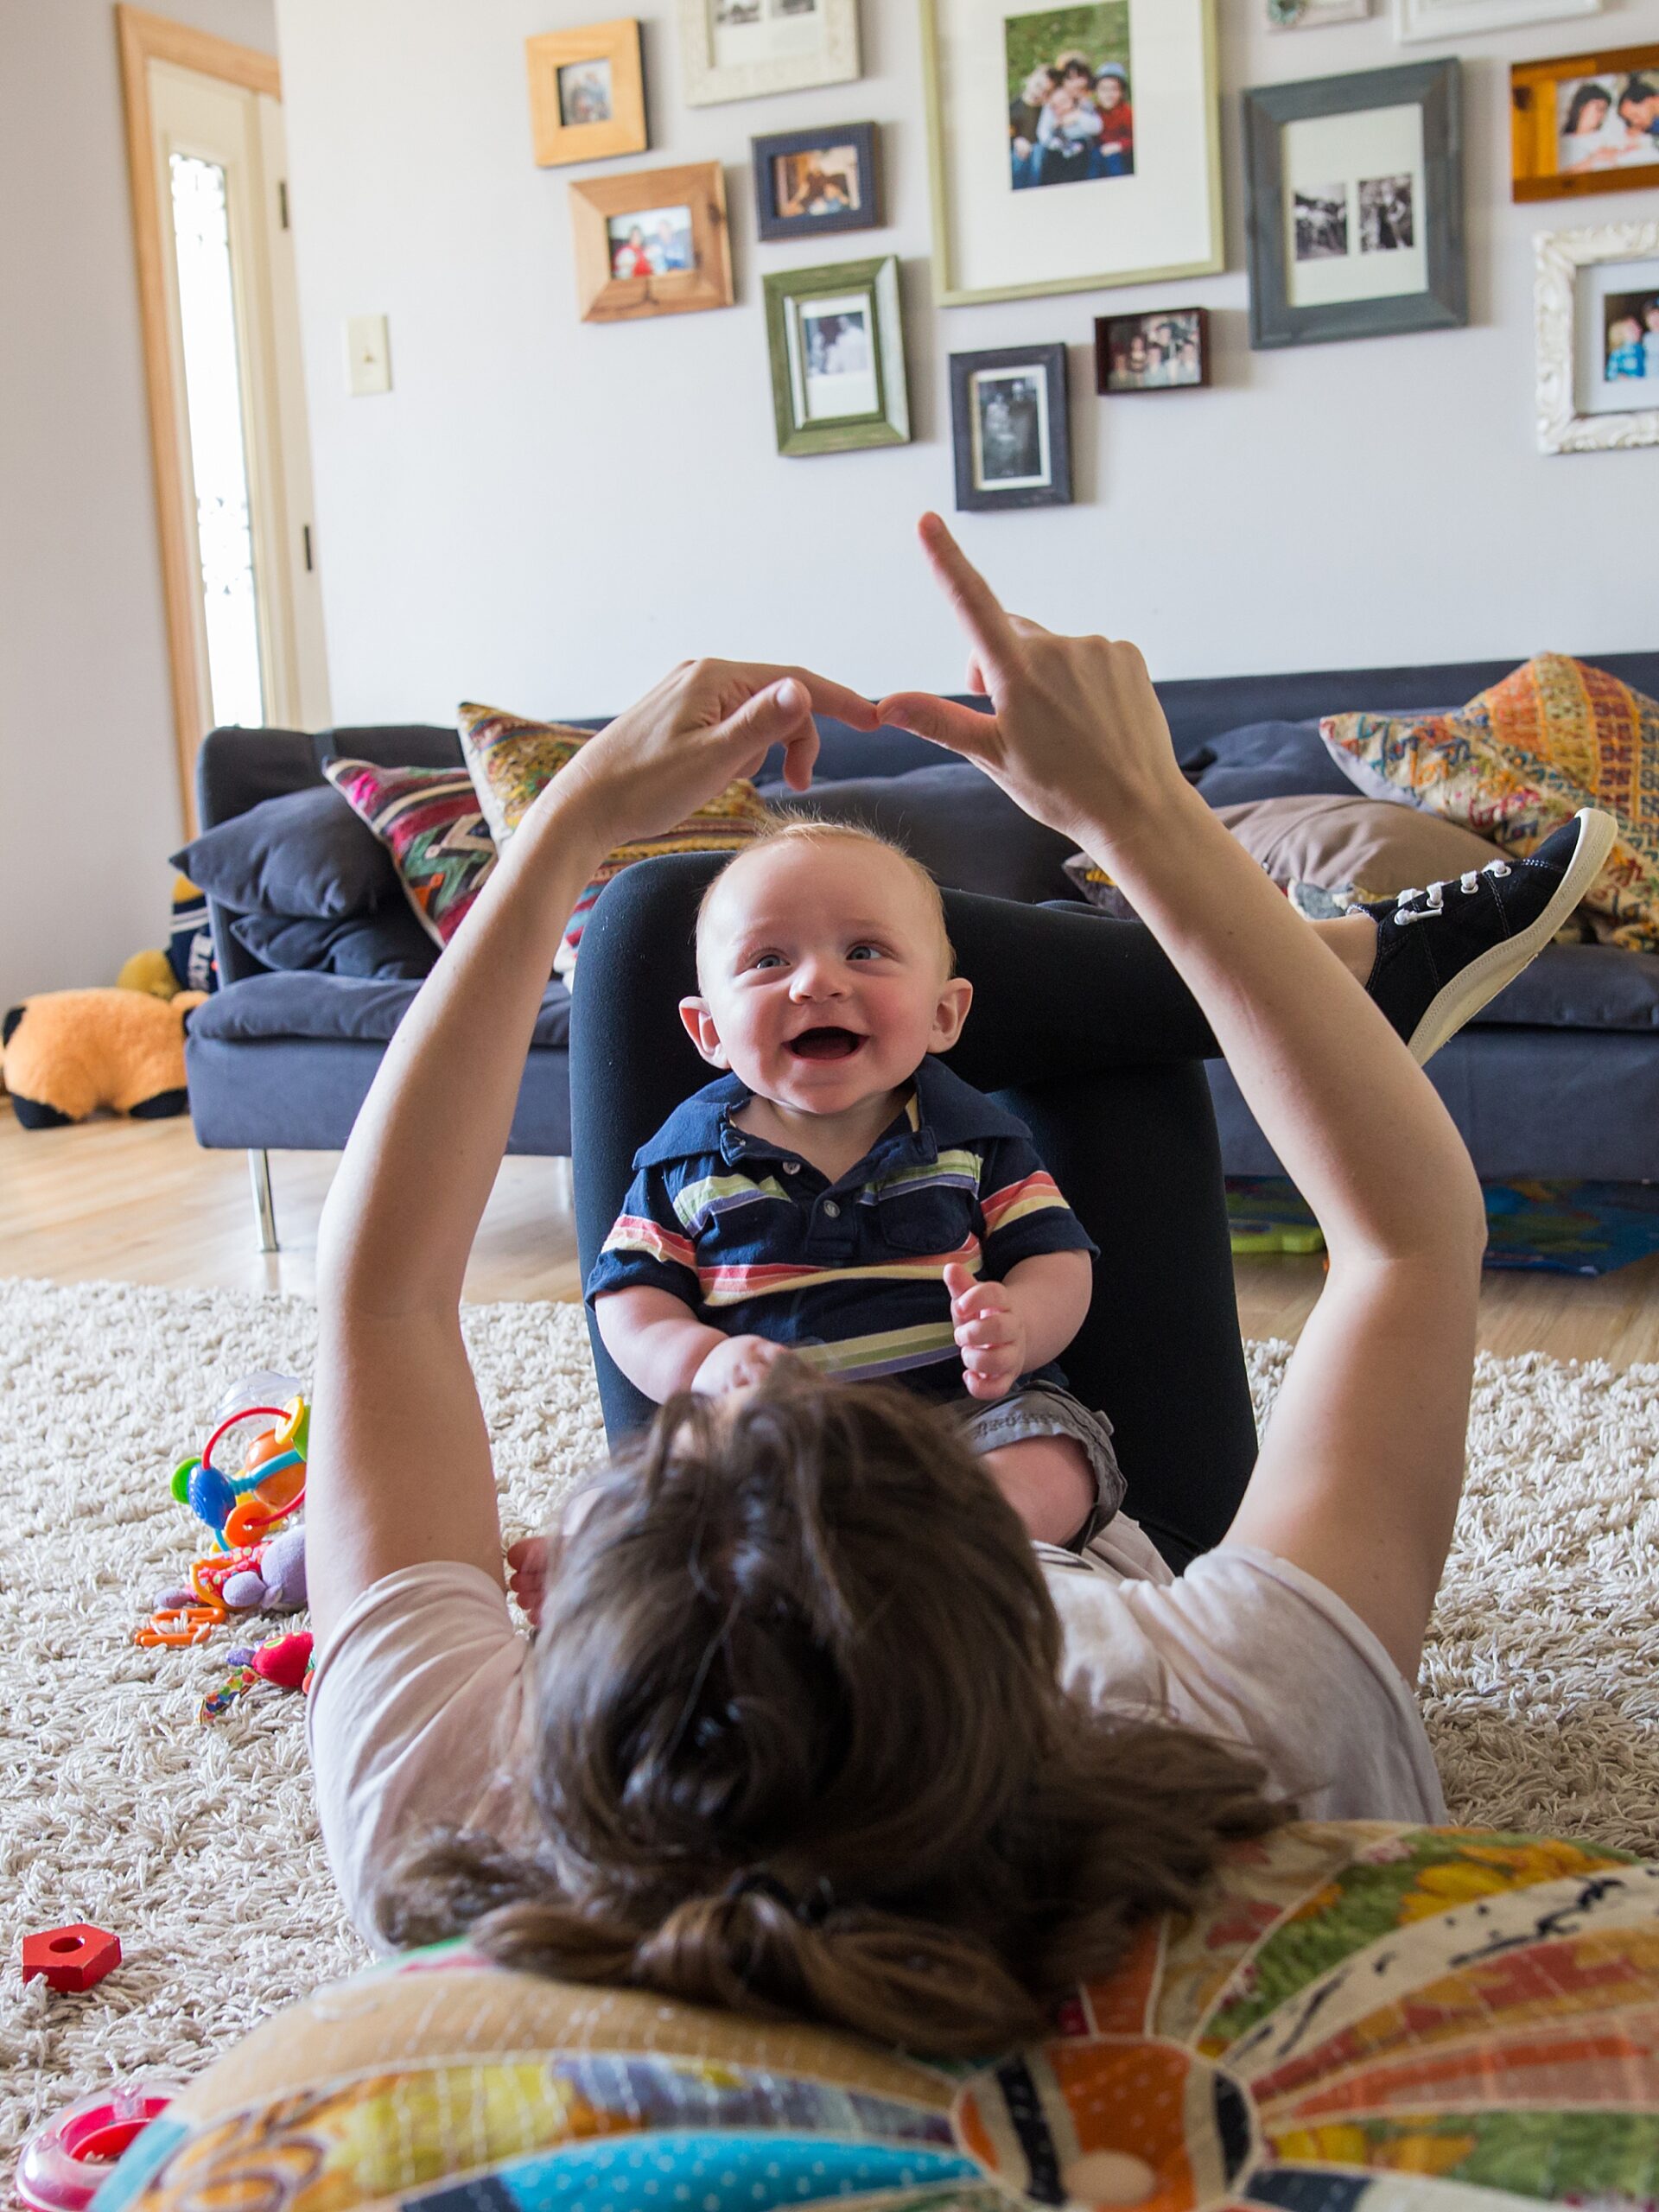 A baby smiles joyfully while playing with an adult lying on the floor, who is lifting the baby up with their feet.